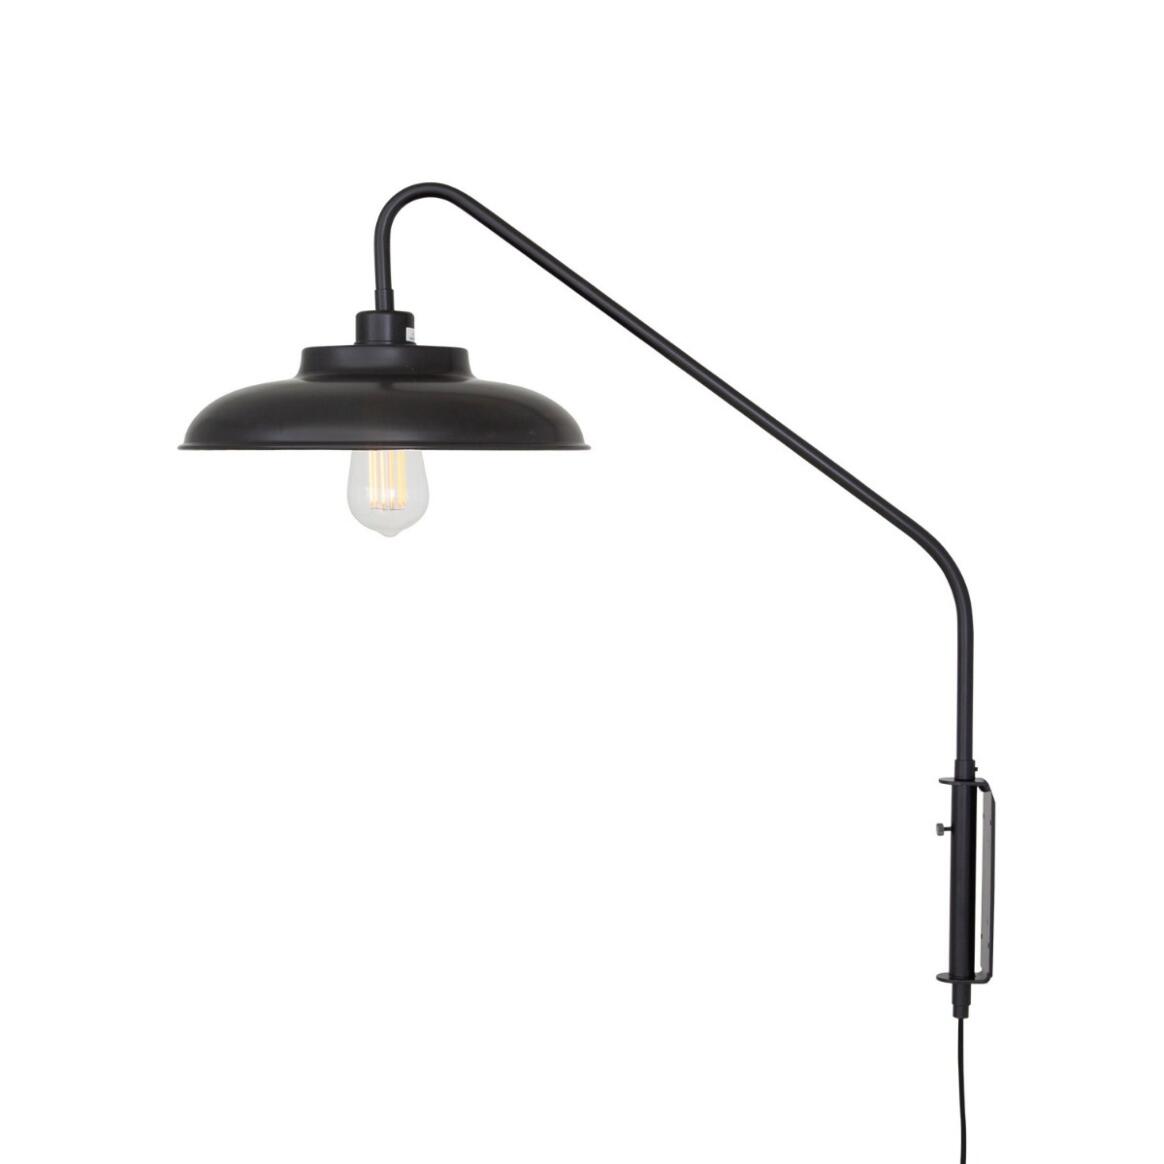 Denver Industrial Swing Arm Wall Light main product image